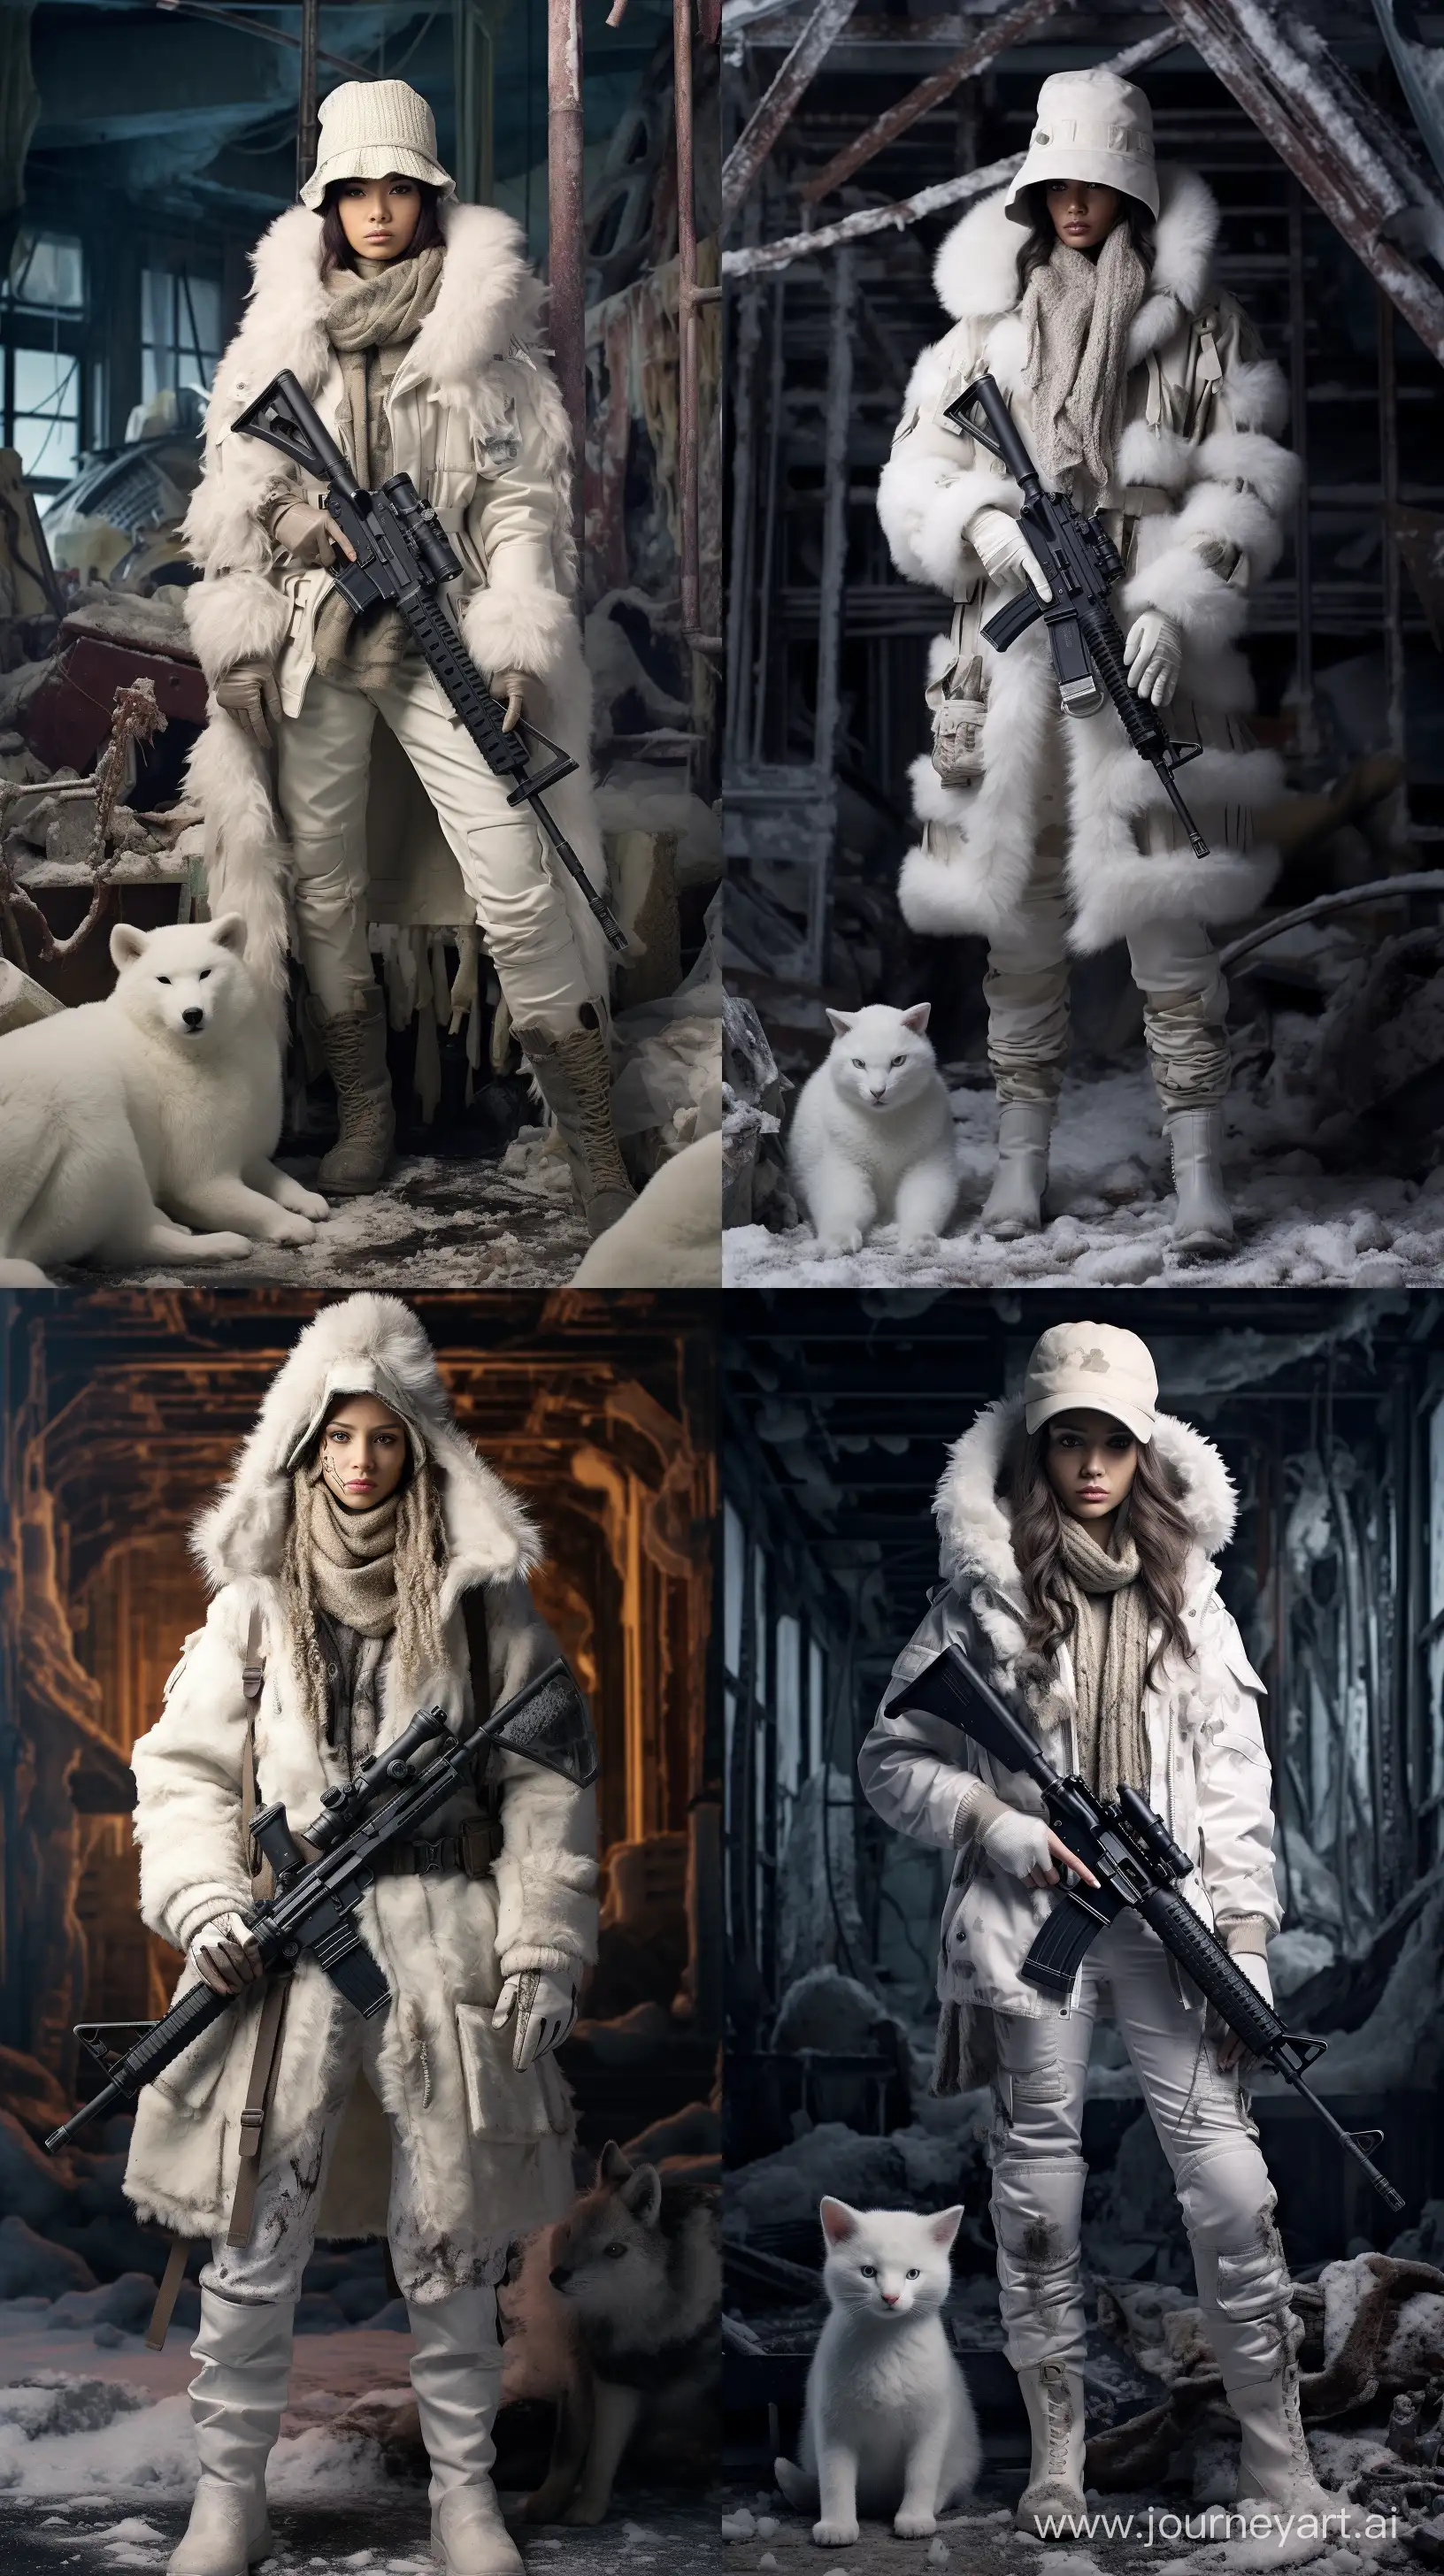 PostApocalyptic-Solo-Expedition-35YearOld-Tomboy-in-Snow-Camouflage-Uniform